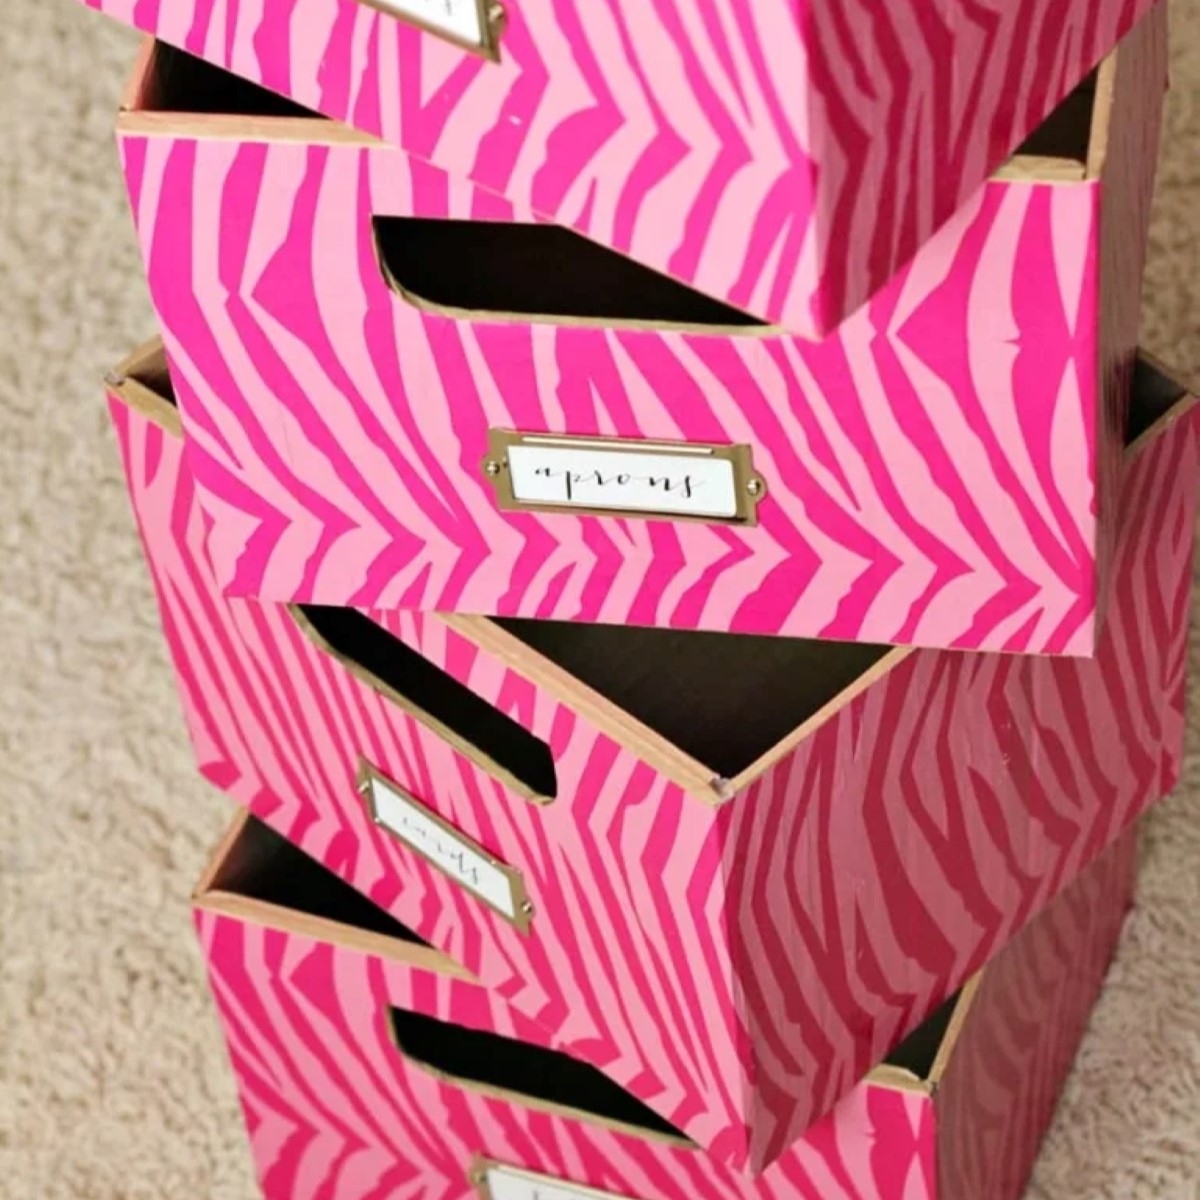 Stack of pink cardboard boxes.